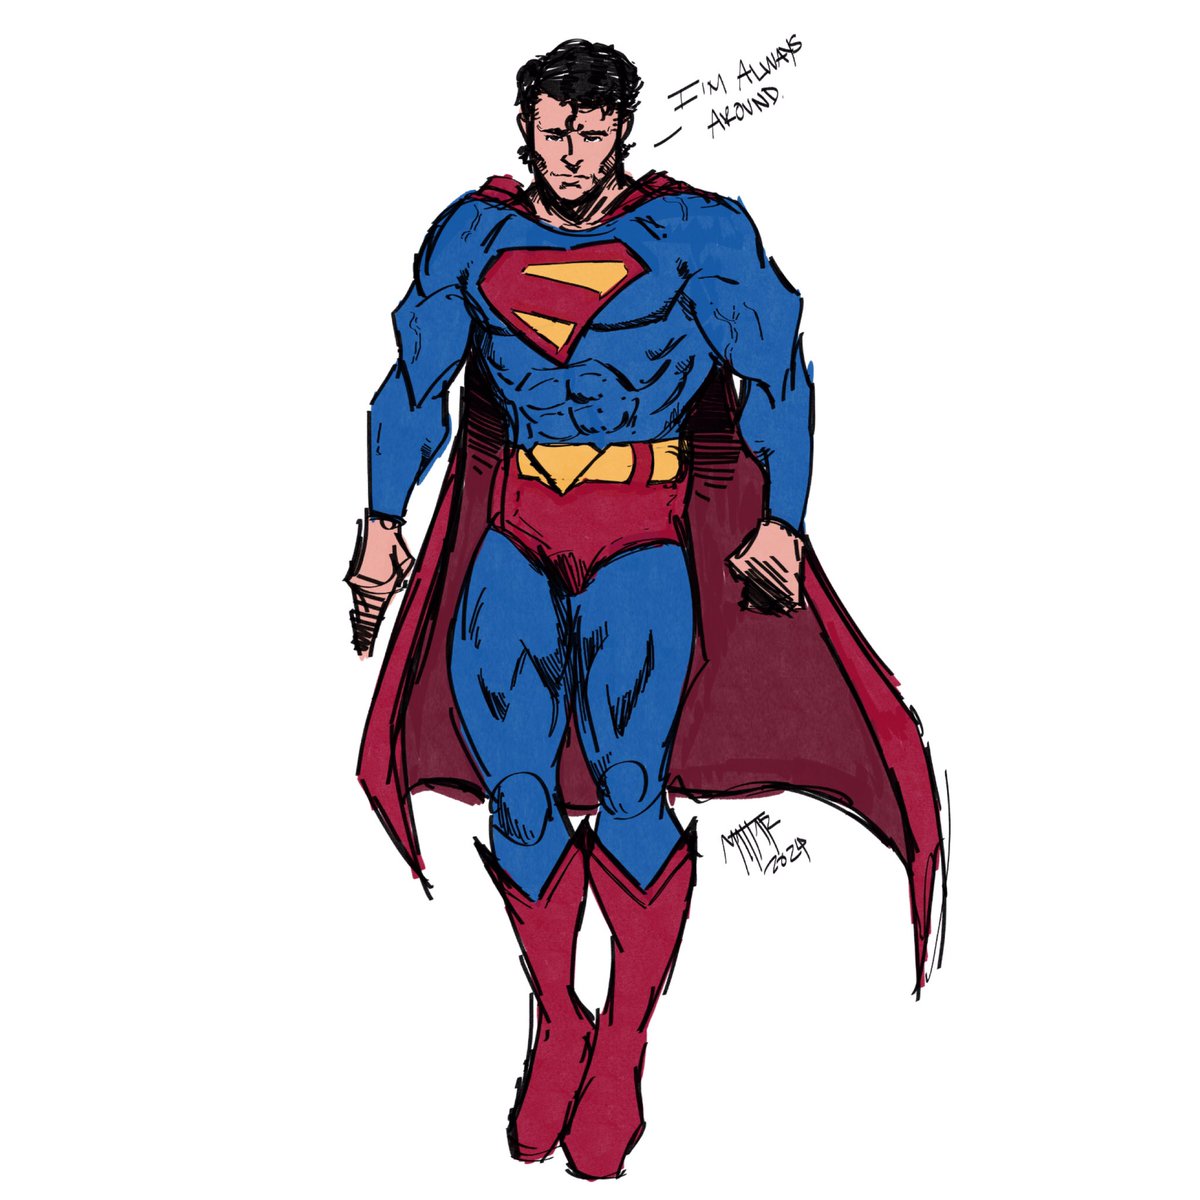 I know Im late but SUPERMAN DAY
I love you dude
#SupermanDay